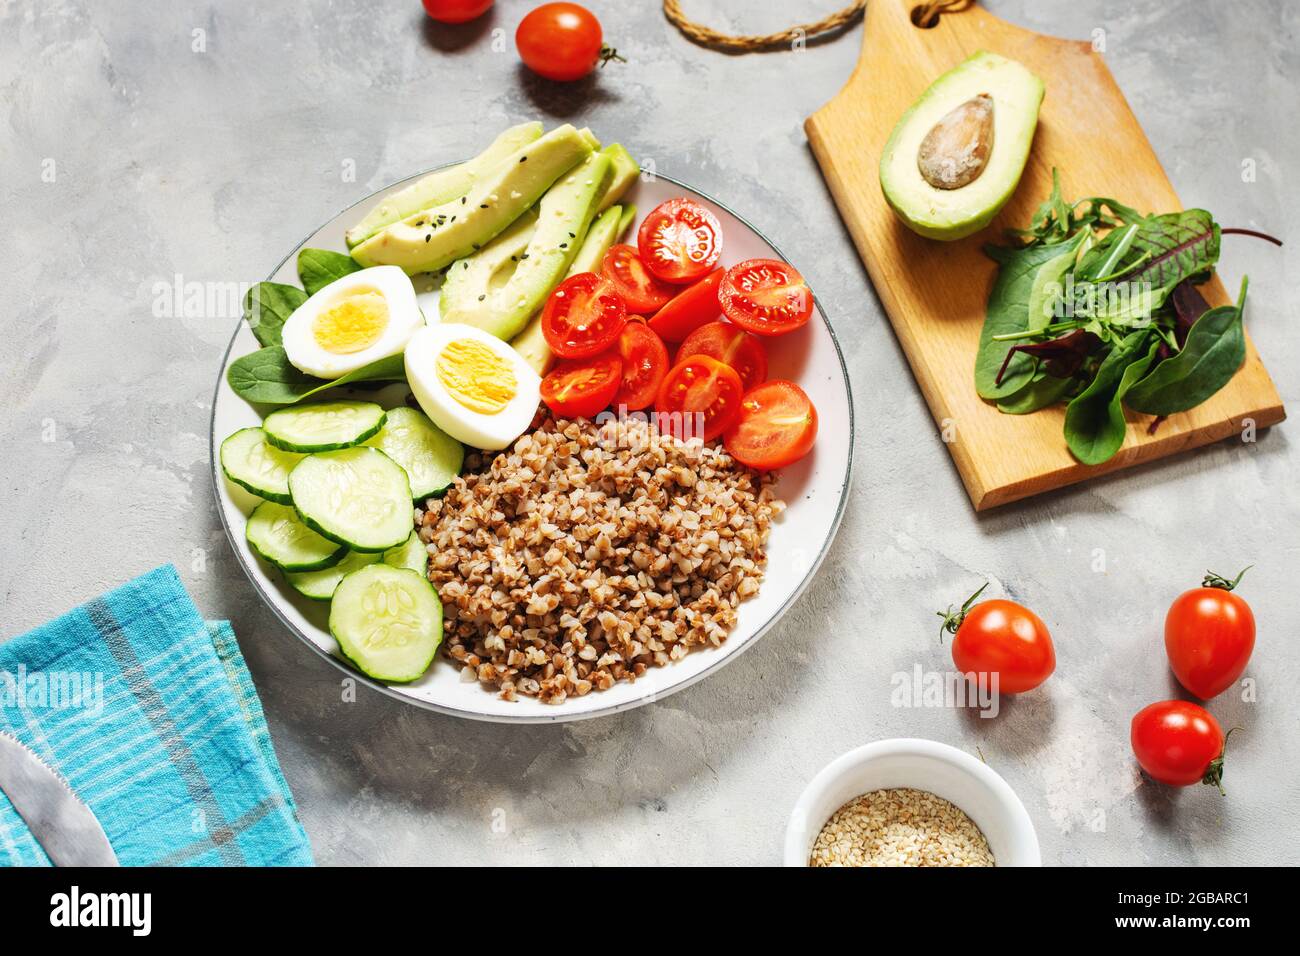 Vegan lunch bowl with avocado, egg, cucumber, tomato and buckwheat on a concrete background Stock Photo